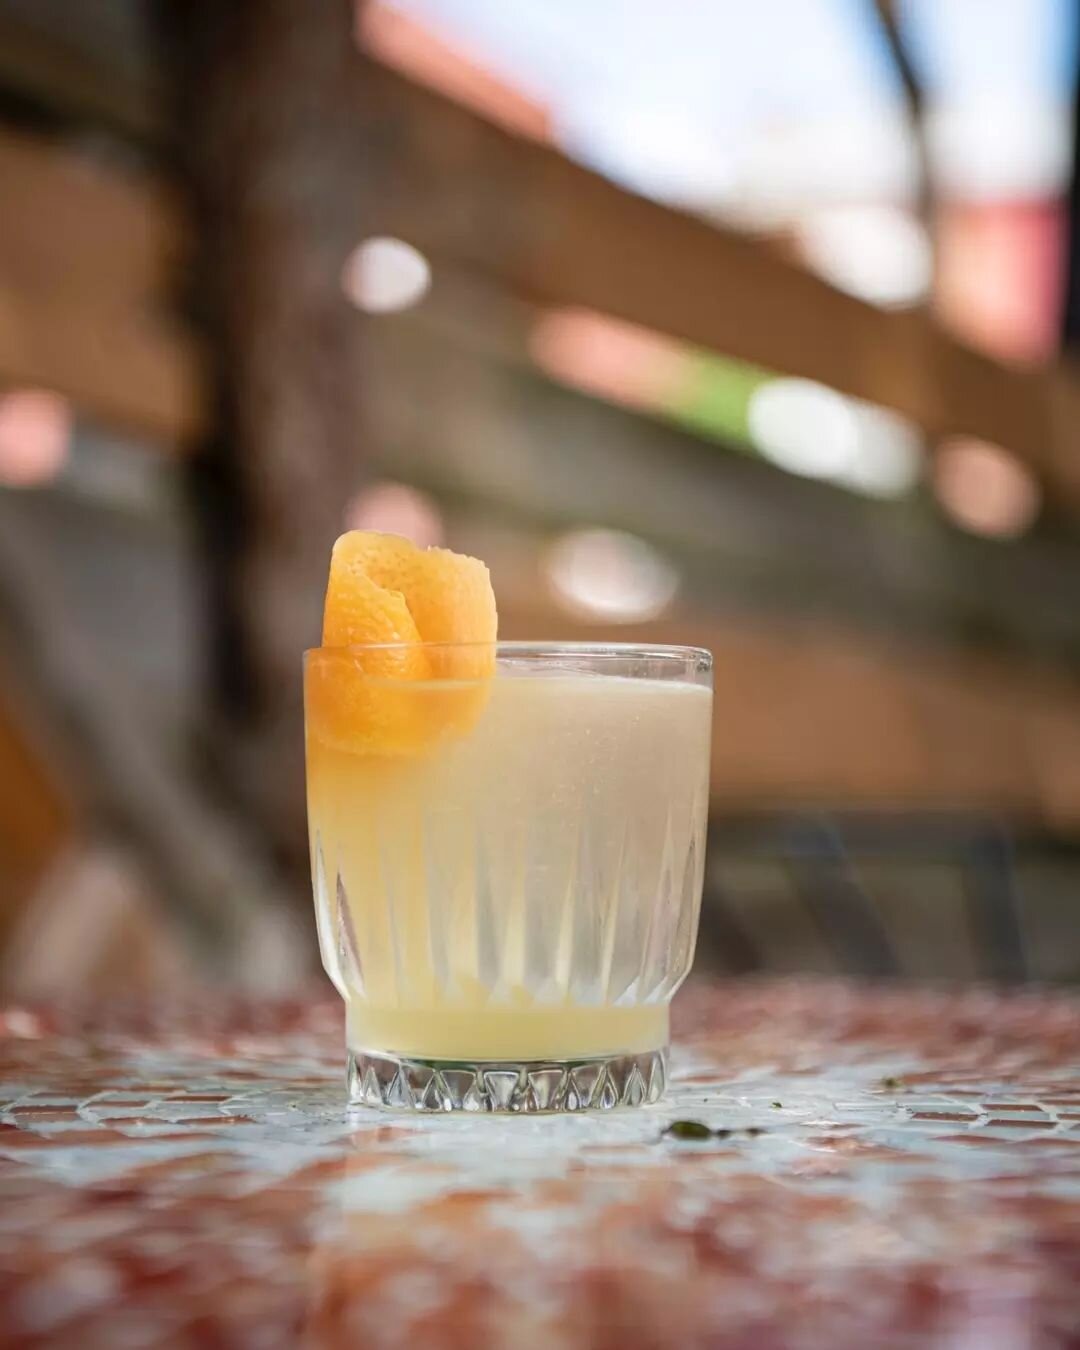 Grab yourself a table on the patio and enjoy some tasty libations under the sun with us tonight at Frazer's! Serving from 5-10pm. (pictured is our James &amp; the Spicy Peach cocktail)
.
MAKE YOUR RESERVATION AT:  https://www.opentable.com/frazers-re